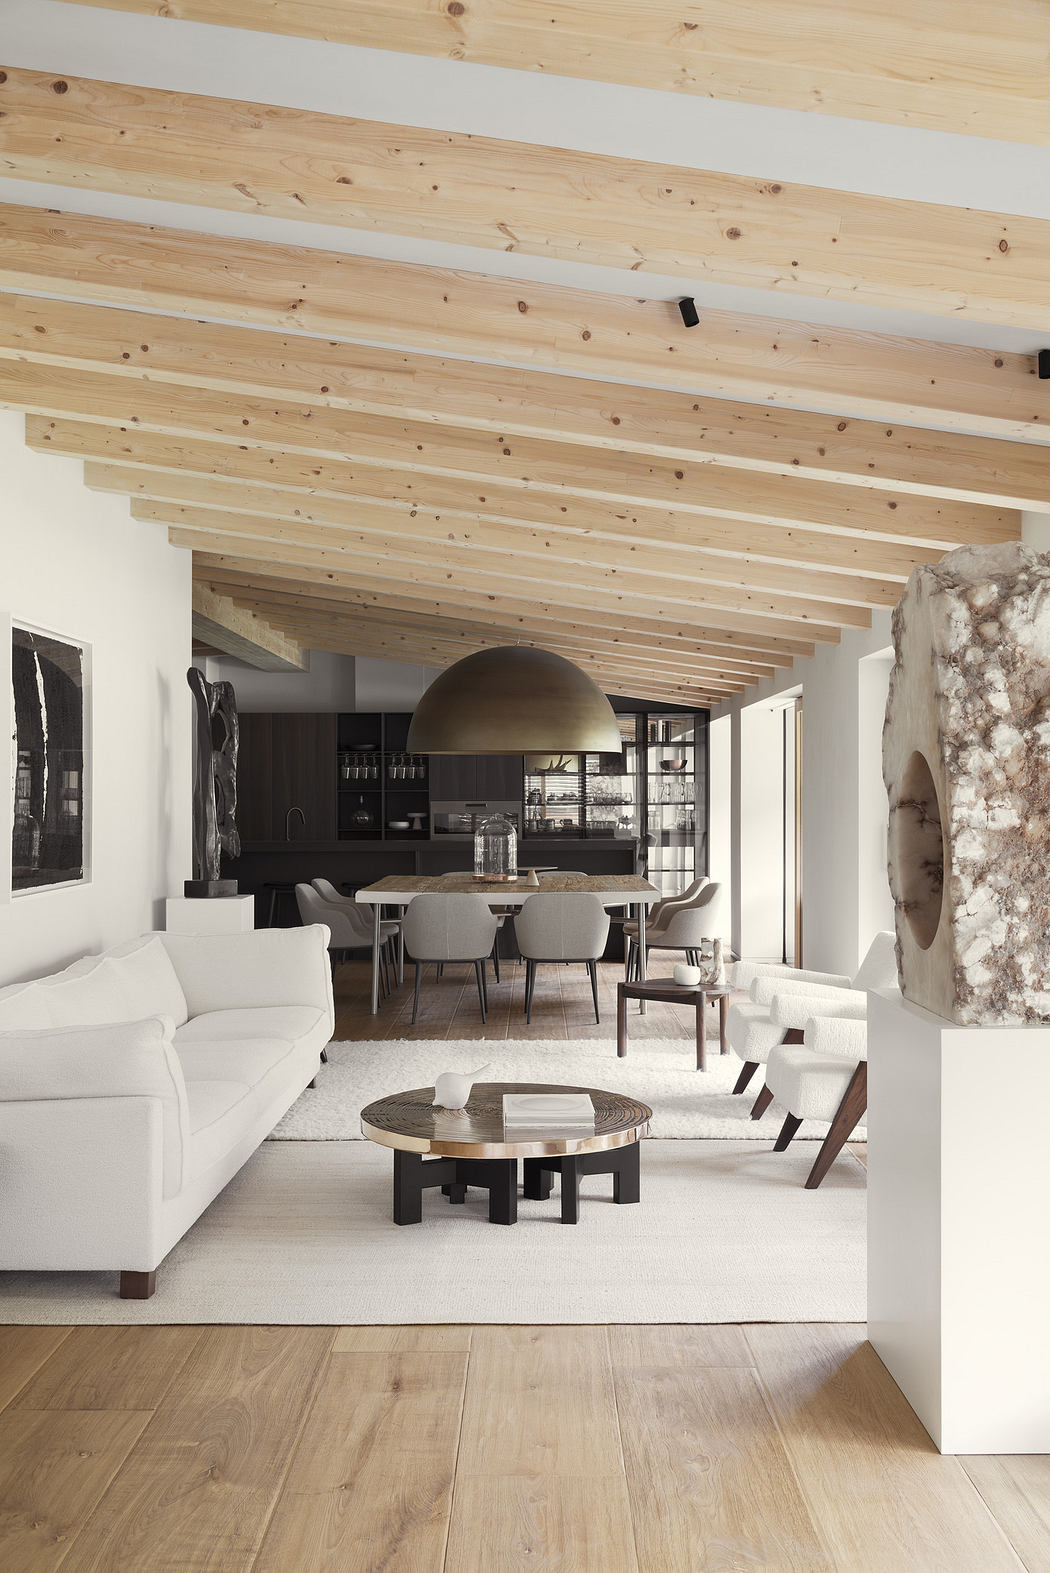 Modern living room with exposed wooden beams, white sofas, and minimalist decor.